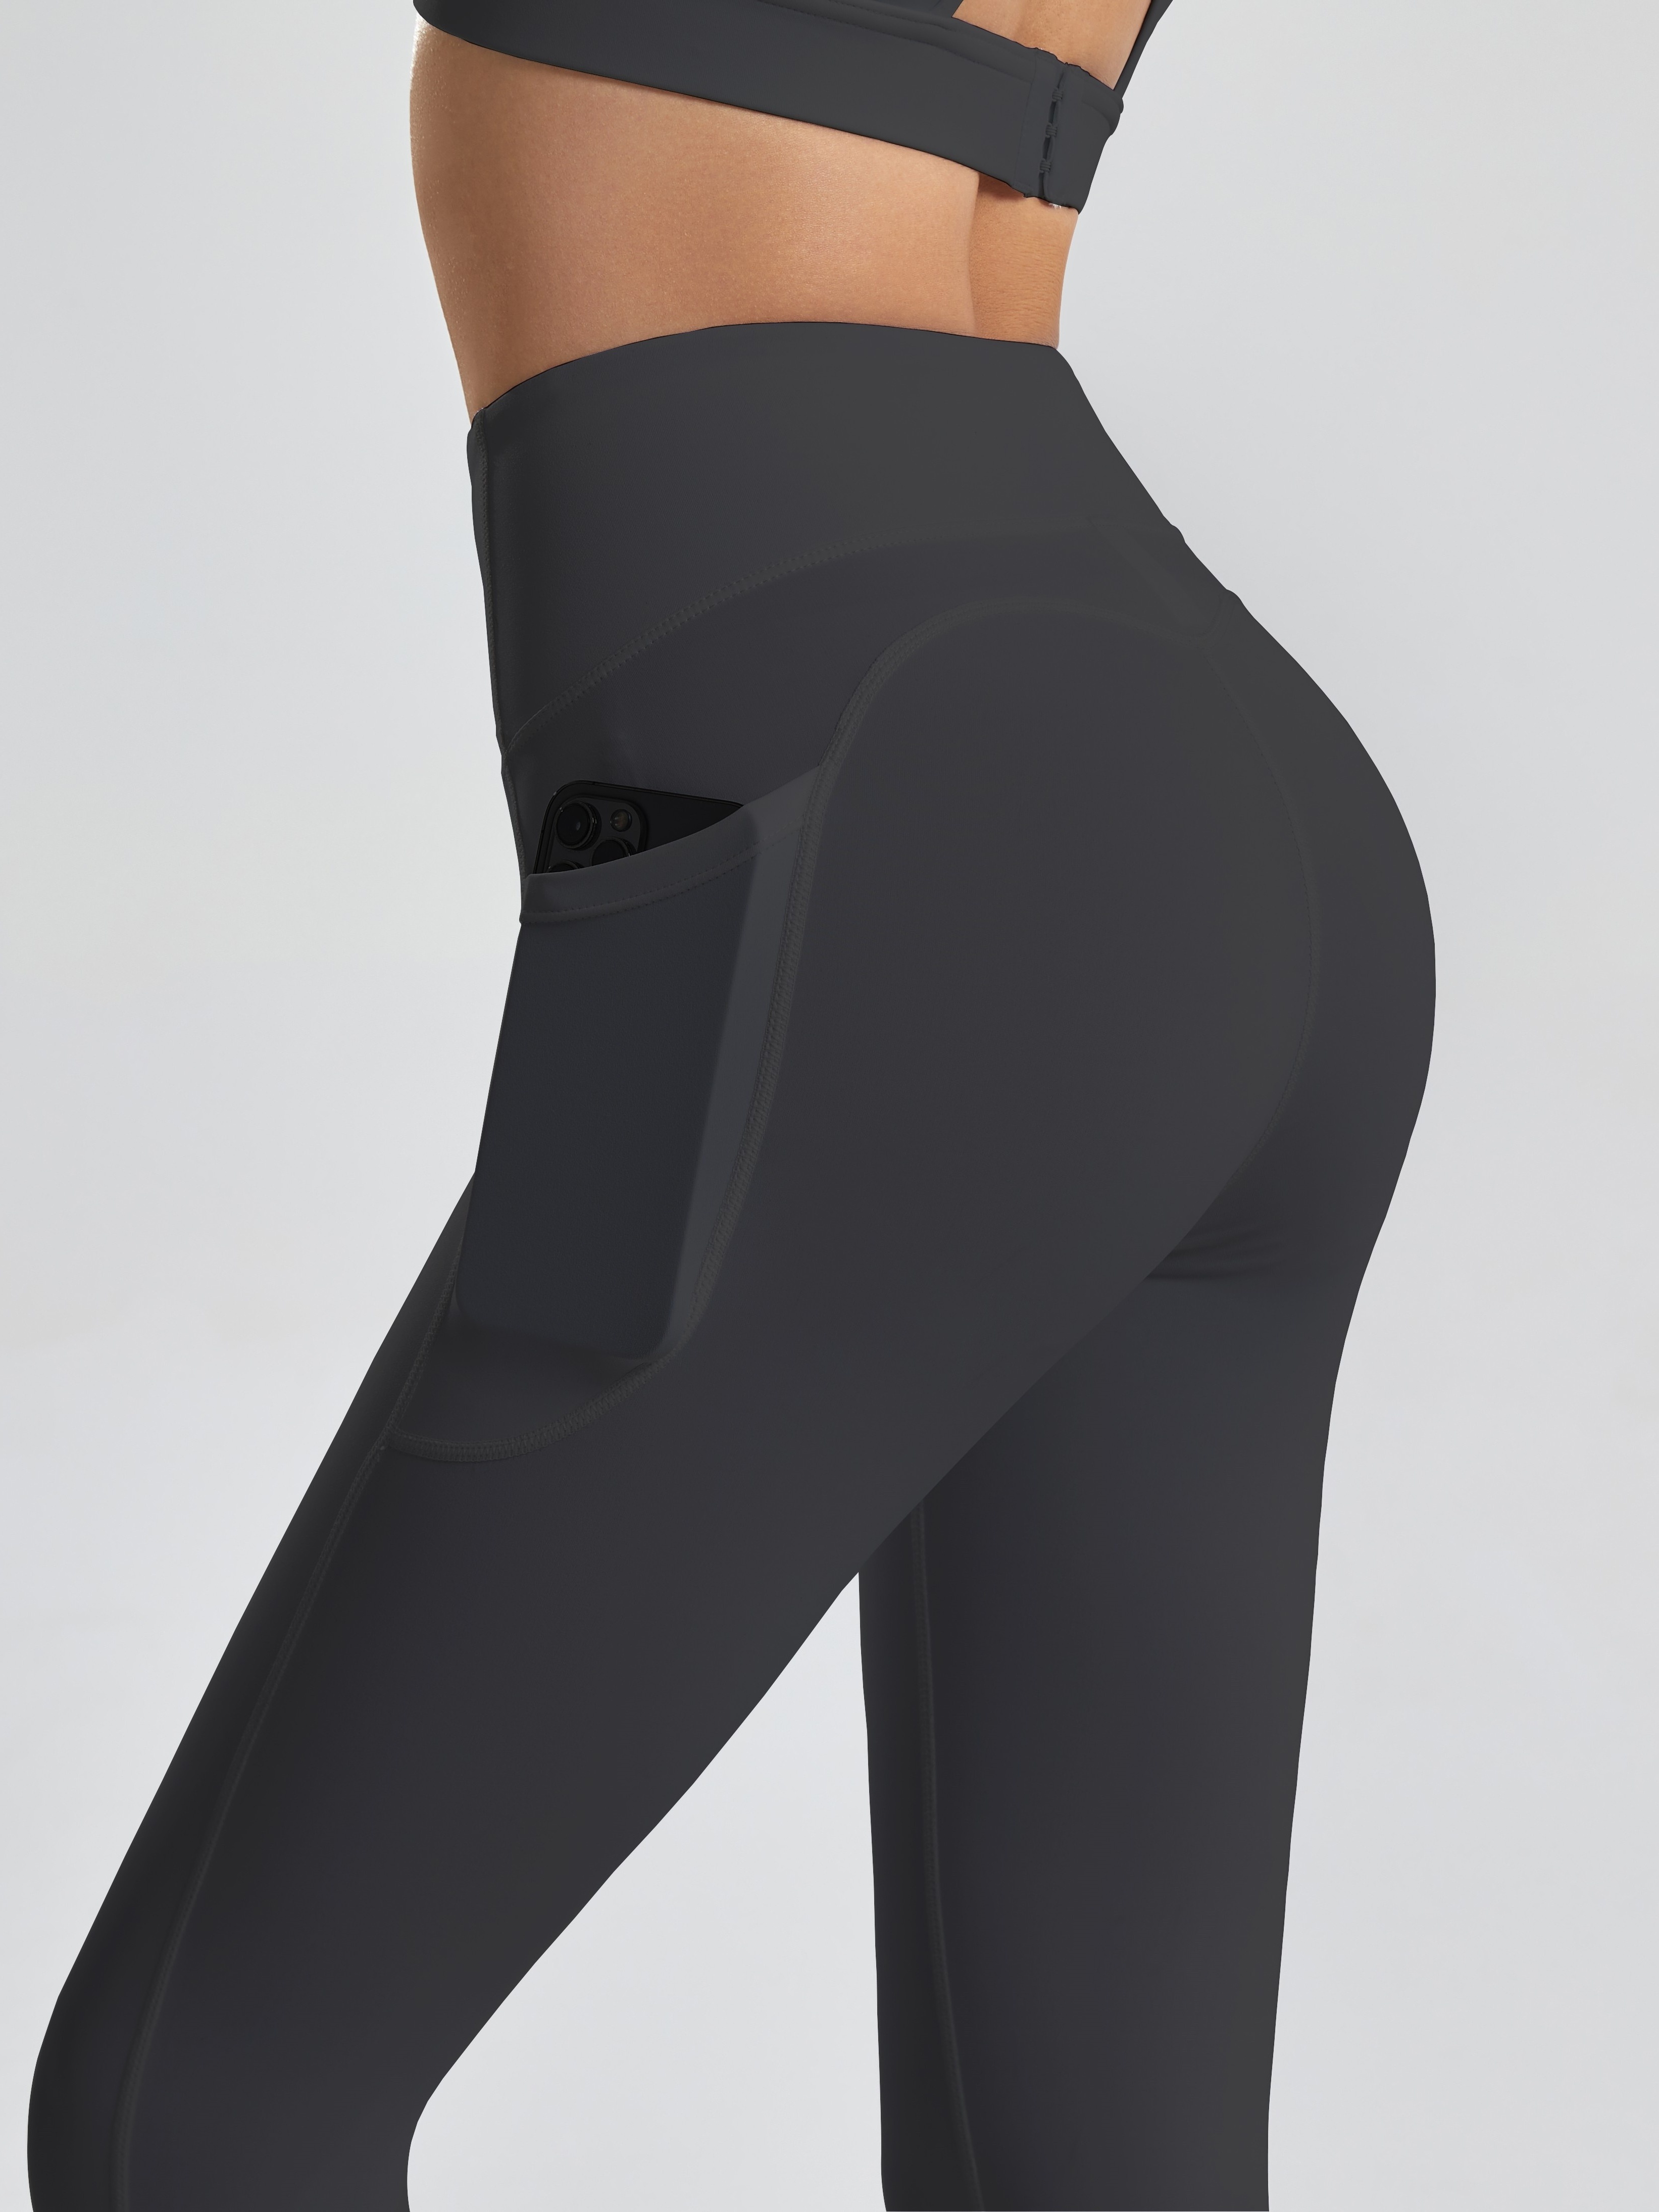 Breathable Yoga Leggings with Phone Pocket and Soft Mesh Contrast - Women's  Fitness Pants